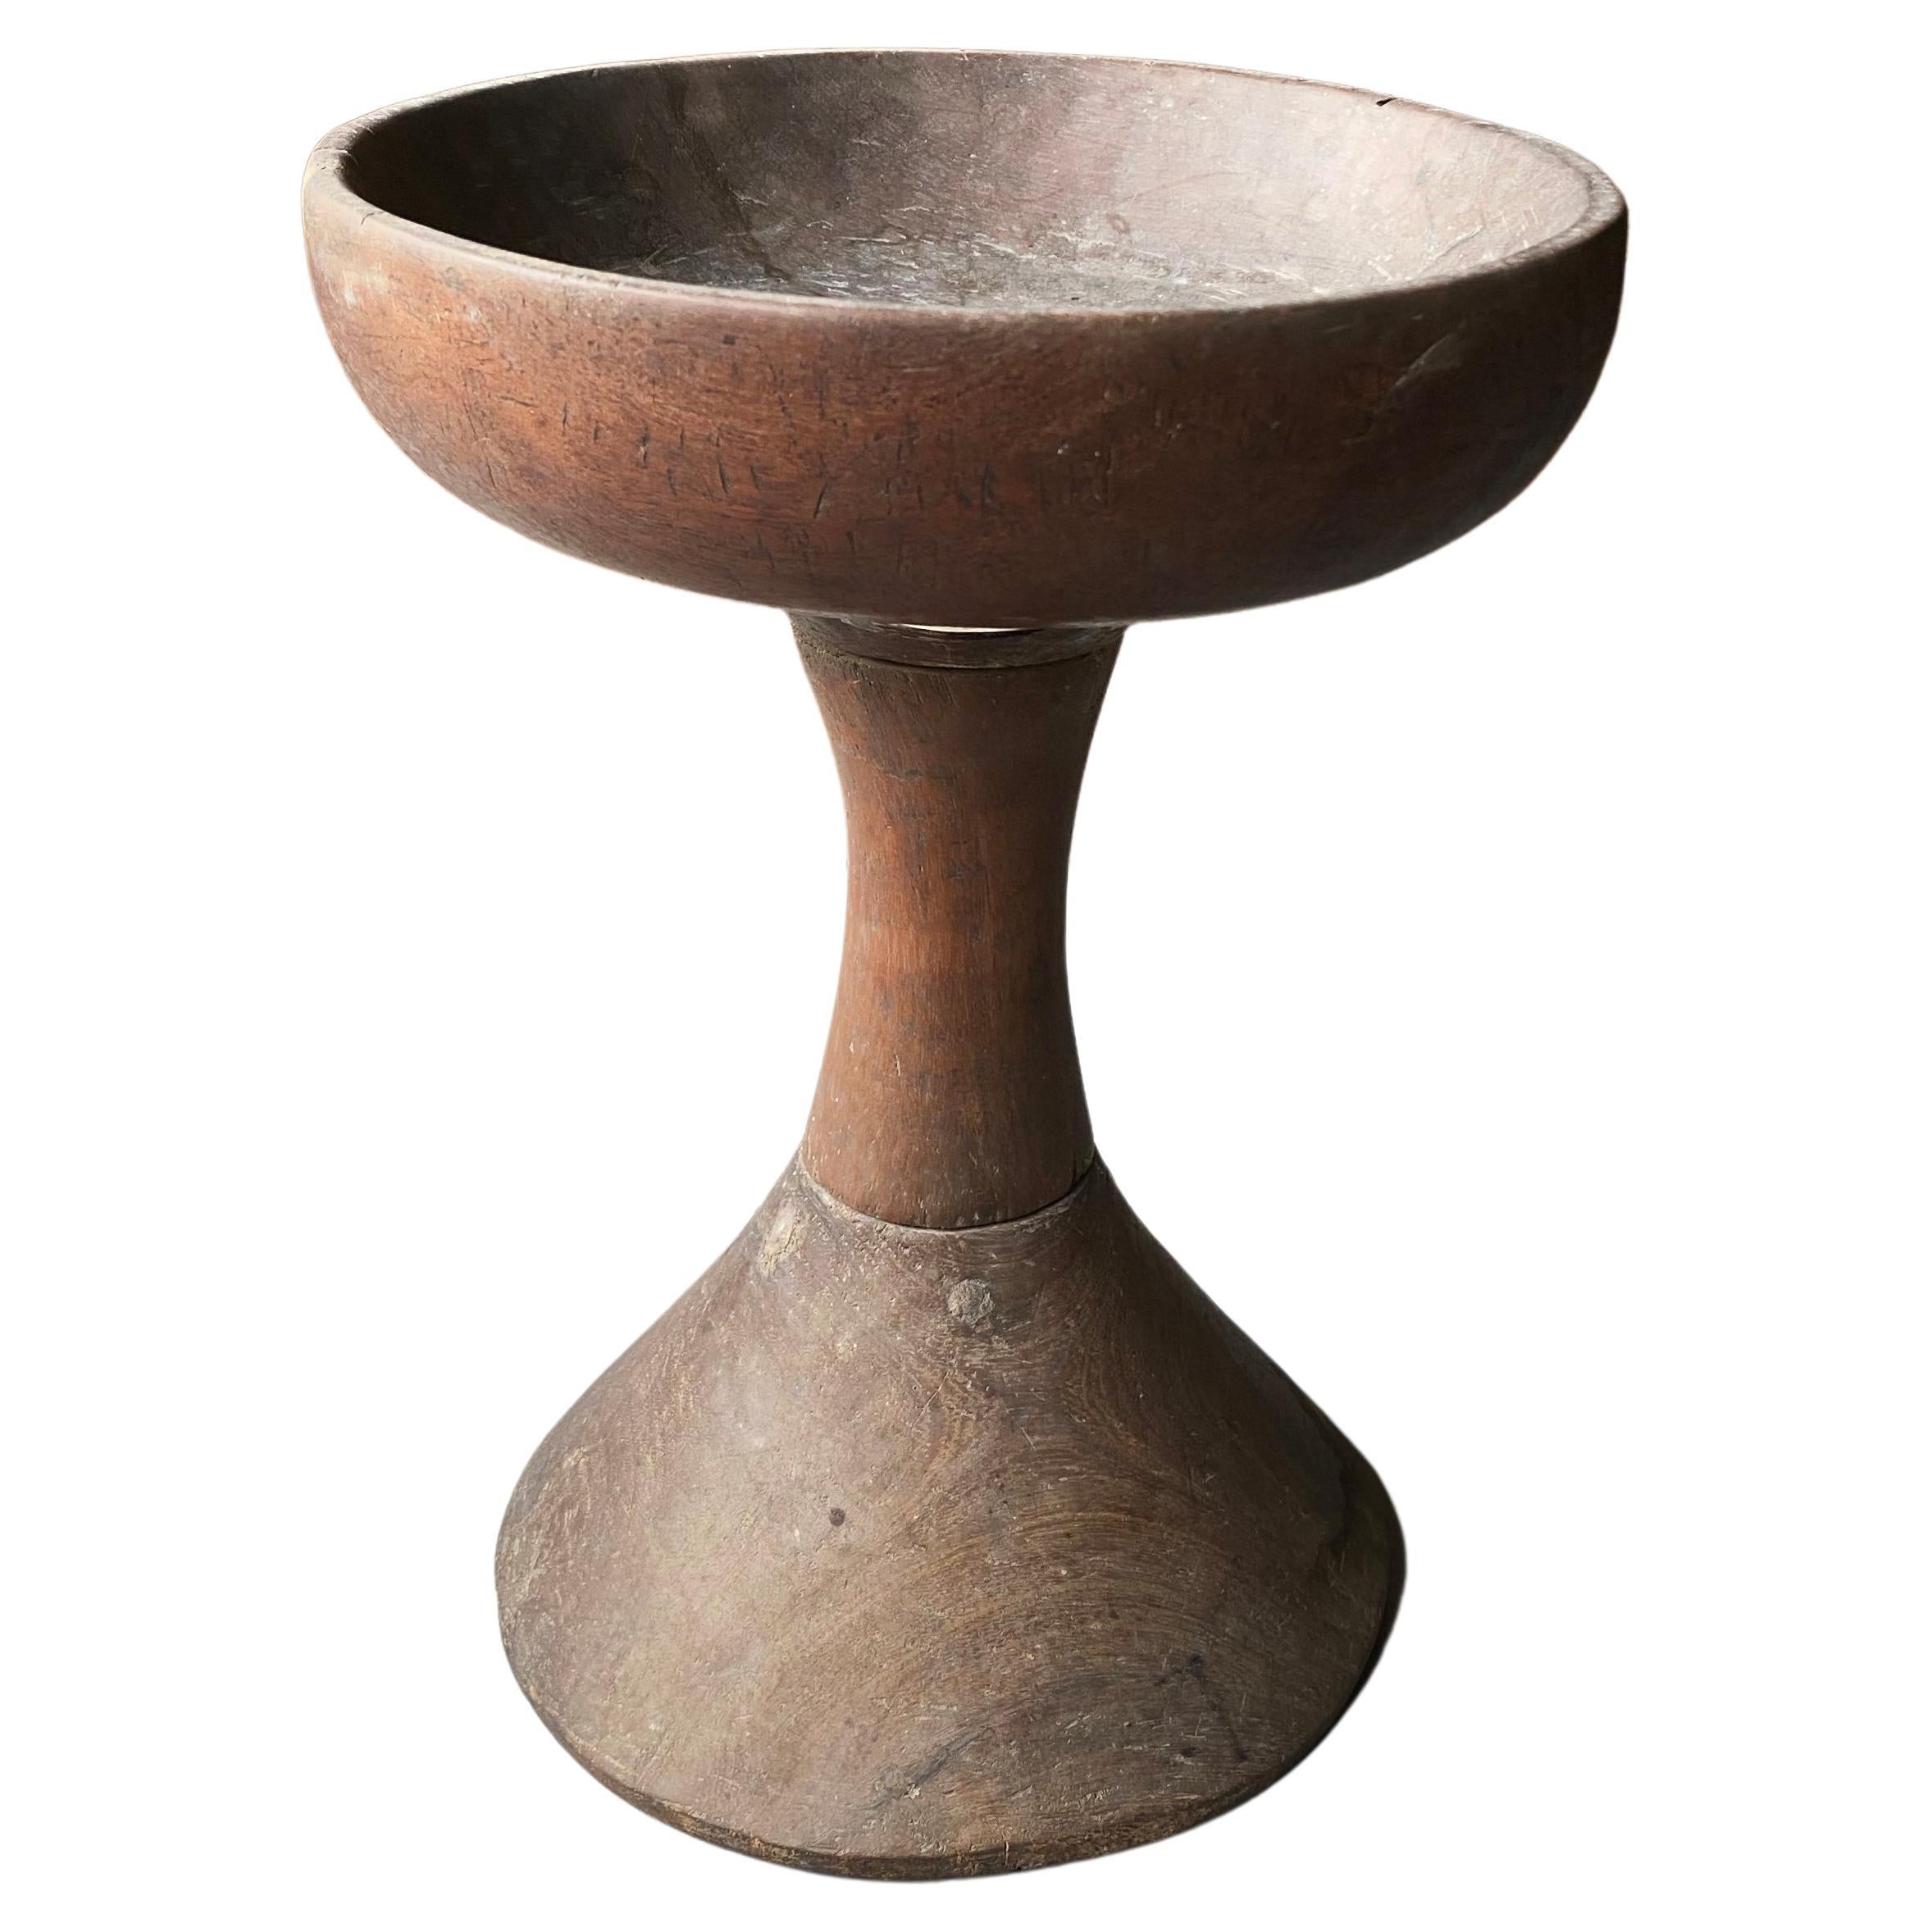 Toraja Wood Ceremonial Bowl, Sulawesi, Indonesia Early 20th Century For Sale